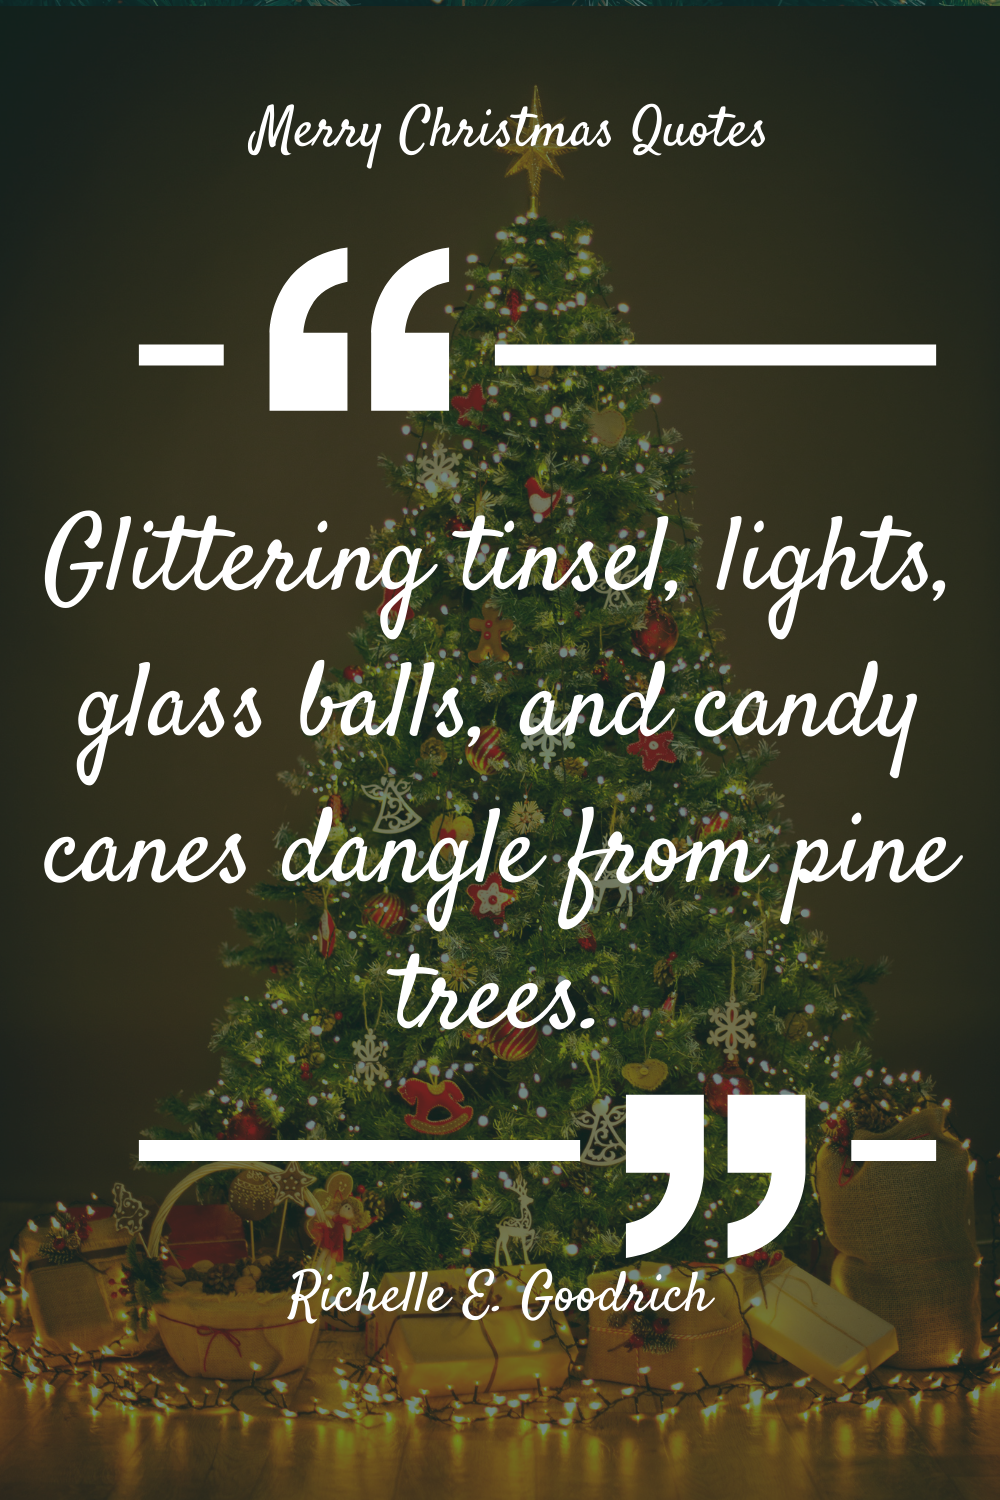 61 Top Christmas Tree Quotes With Images 2021 - Merry Christmas Quotes